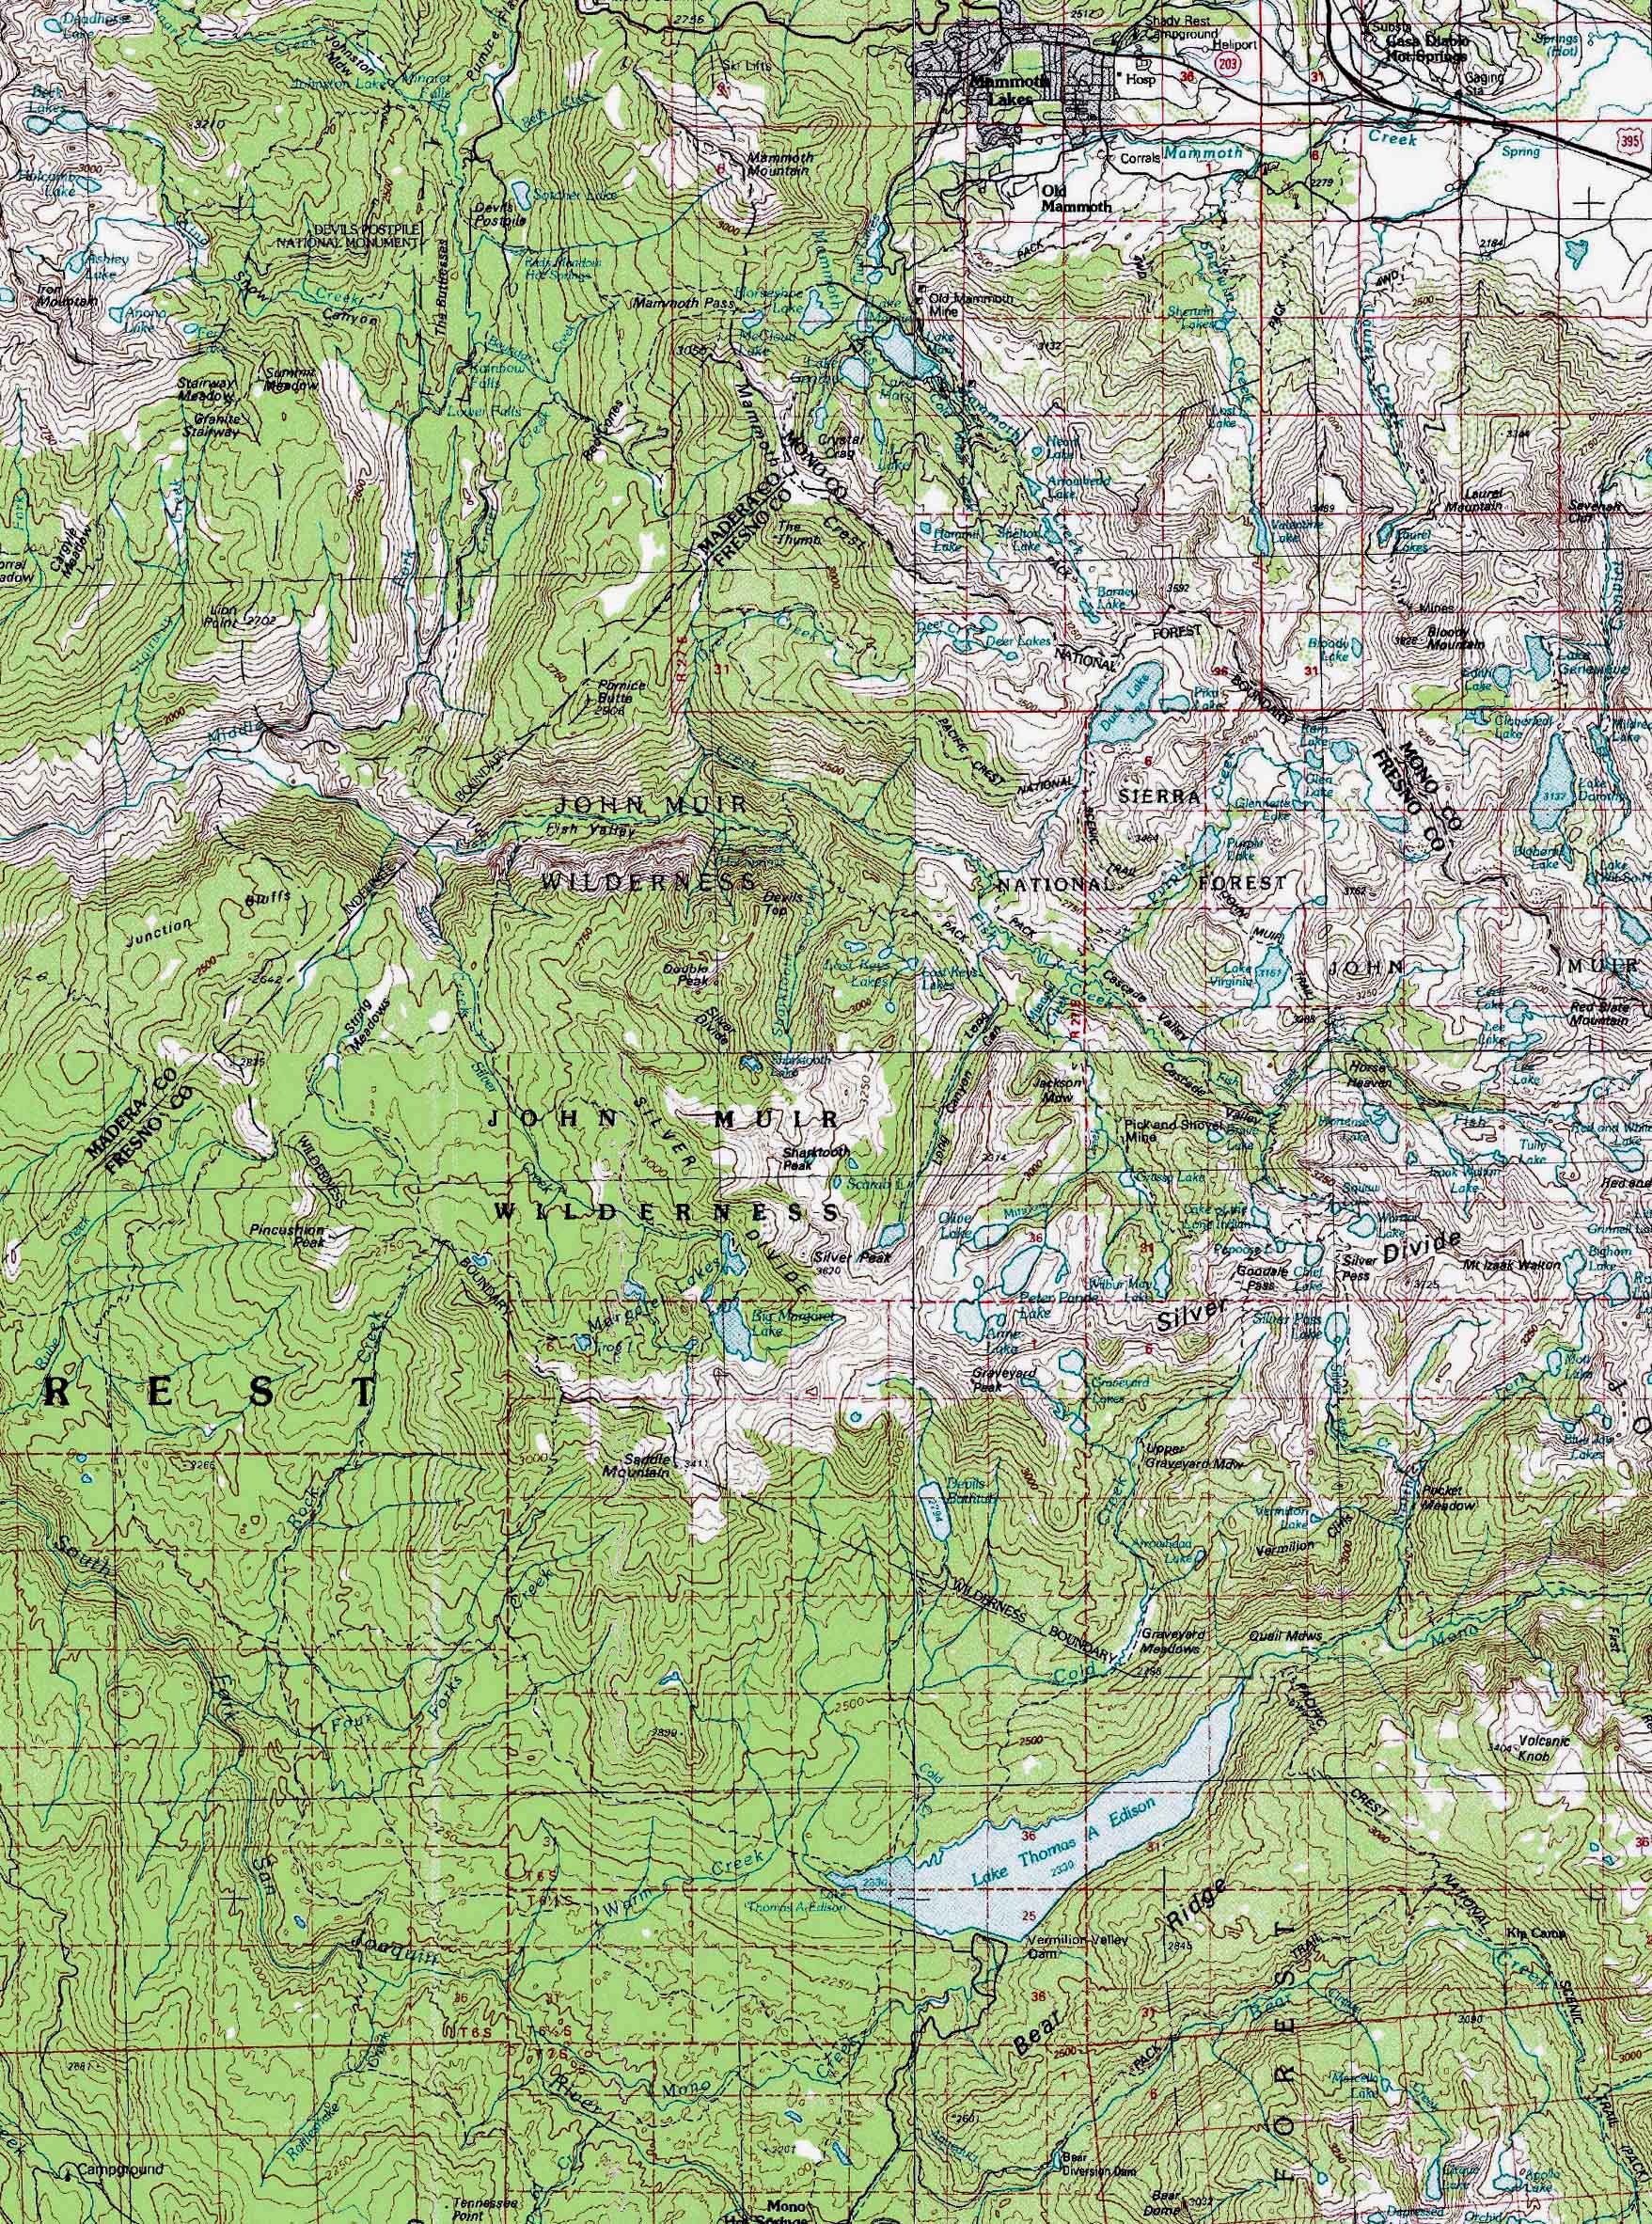 Reds Meadow South JMT to Vermiliong Valley map.